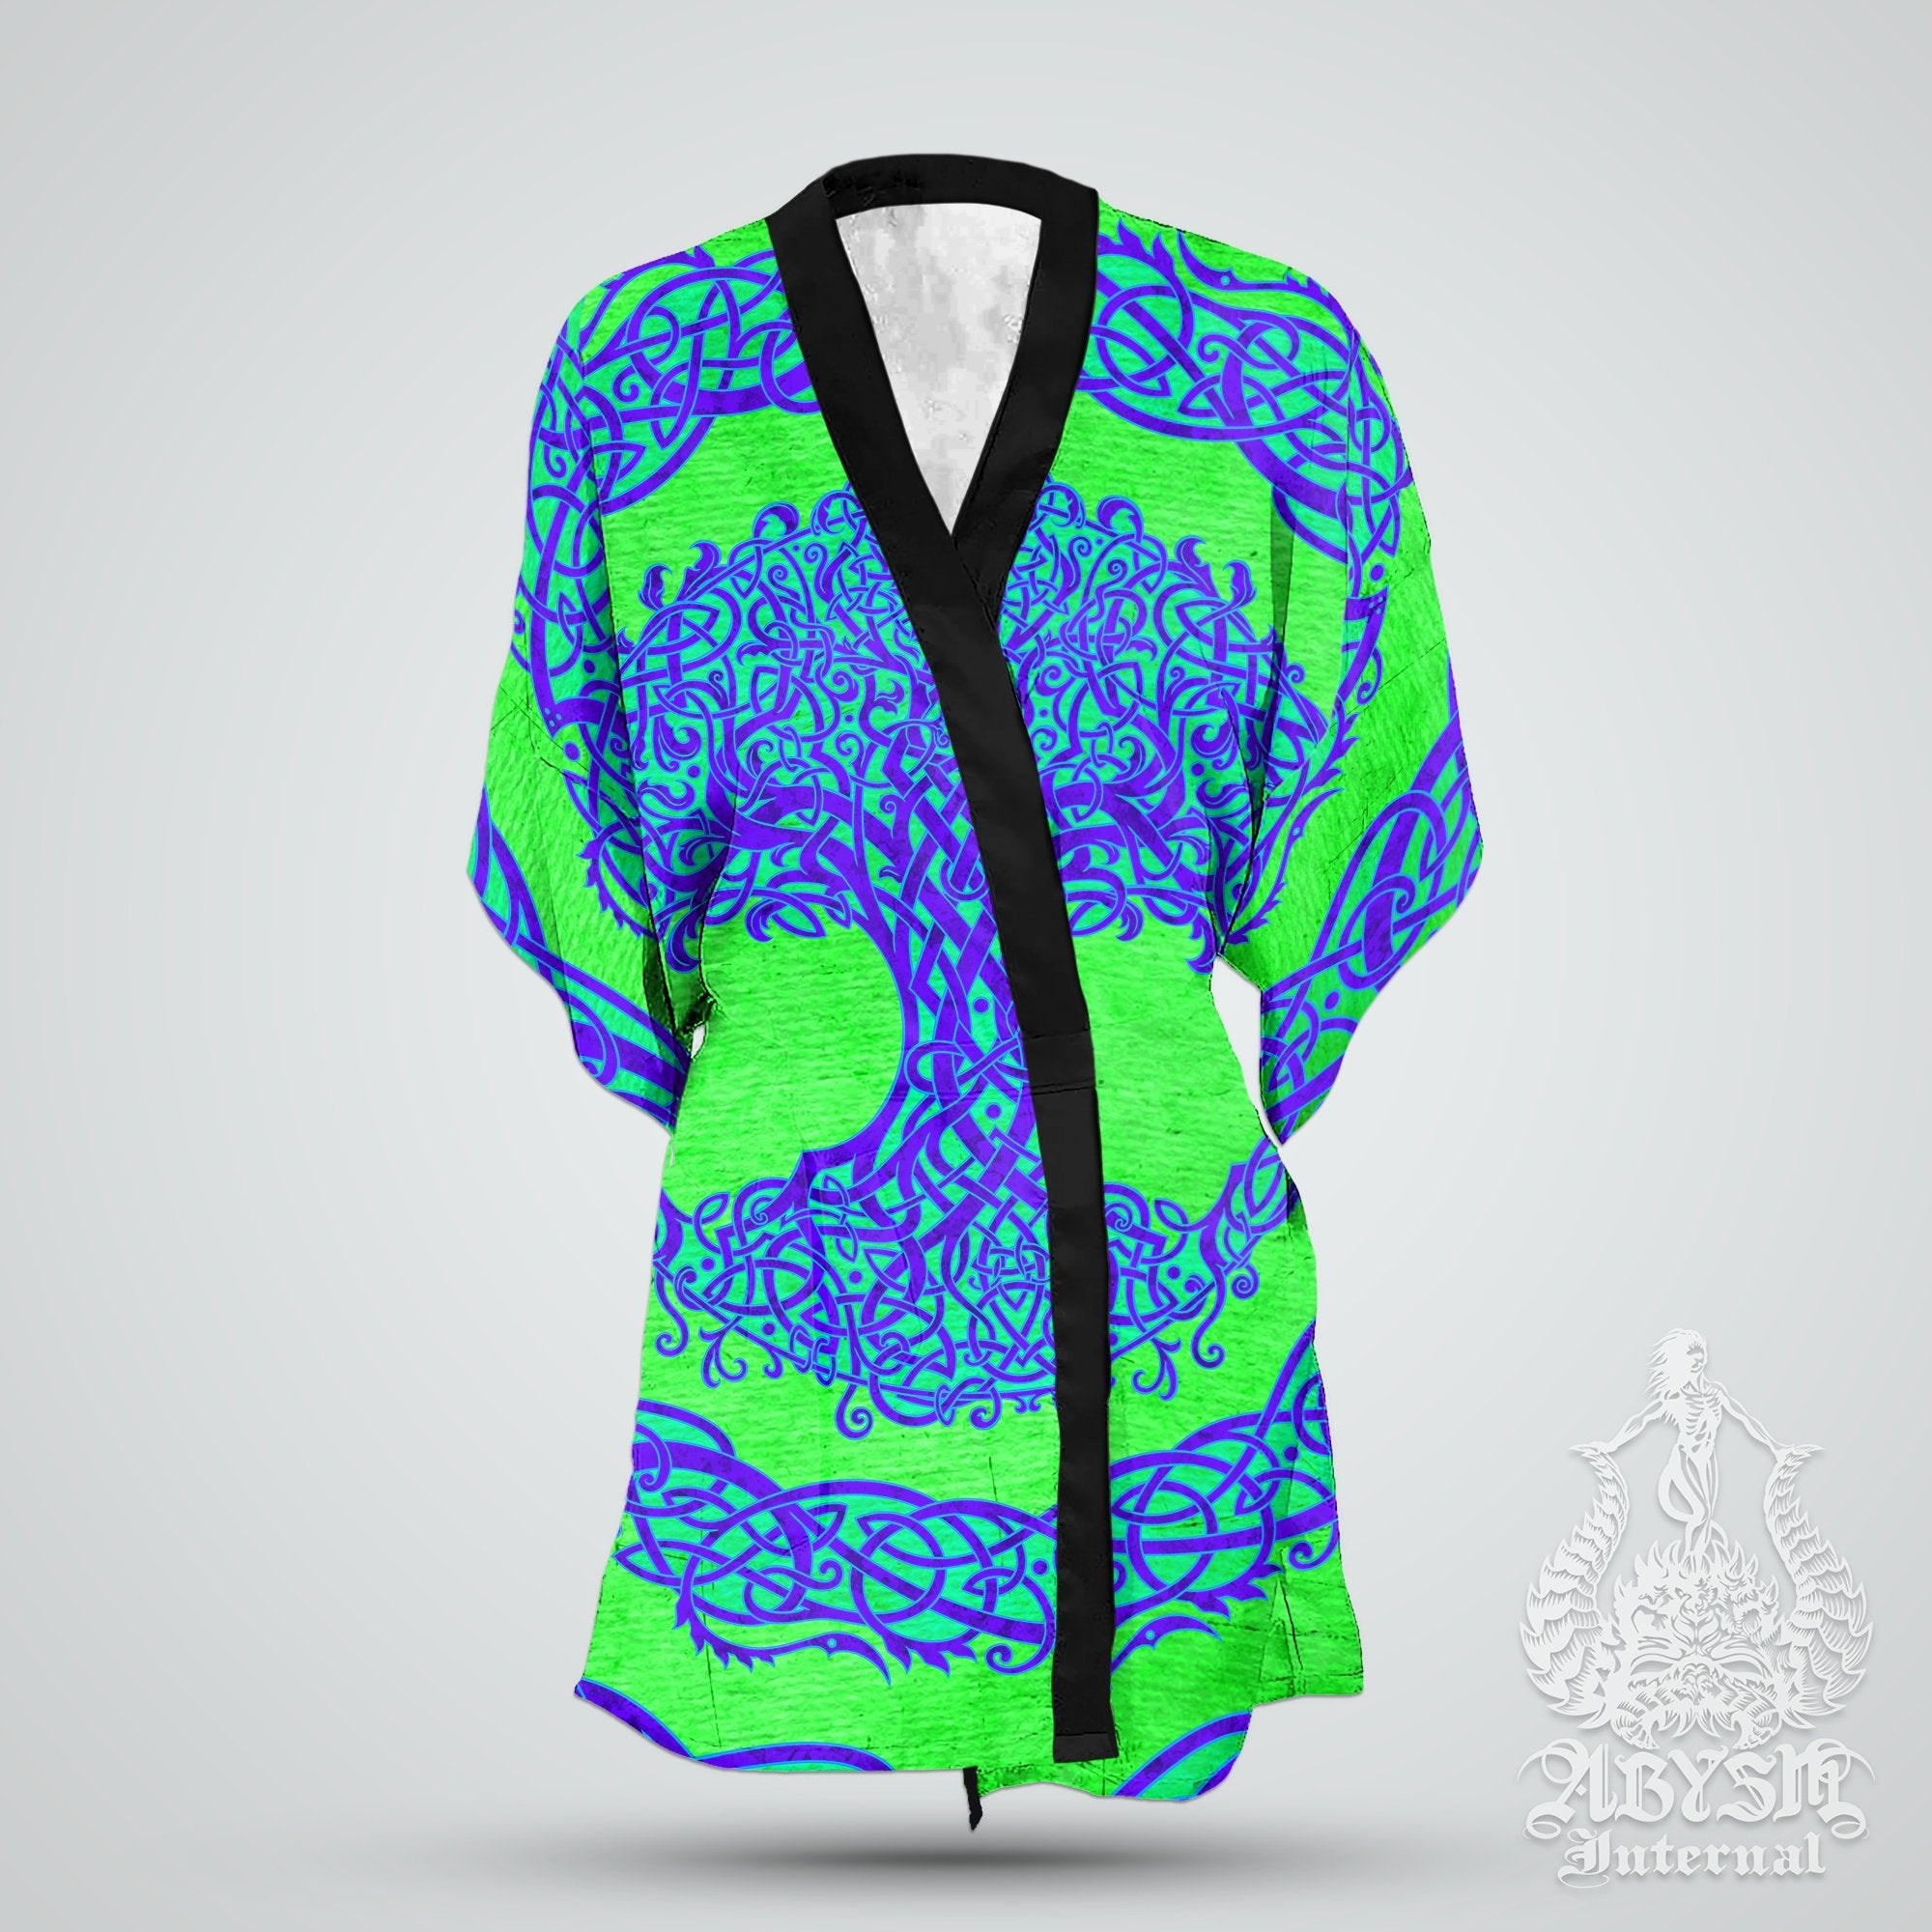 Tree of Life Cover Up, Beach Outfit, Celtic Party Kimono, Wicca Summer Festival Robe, Witchy Indie and Alternative Clothing, Unisex - Psy - Abysm Internal